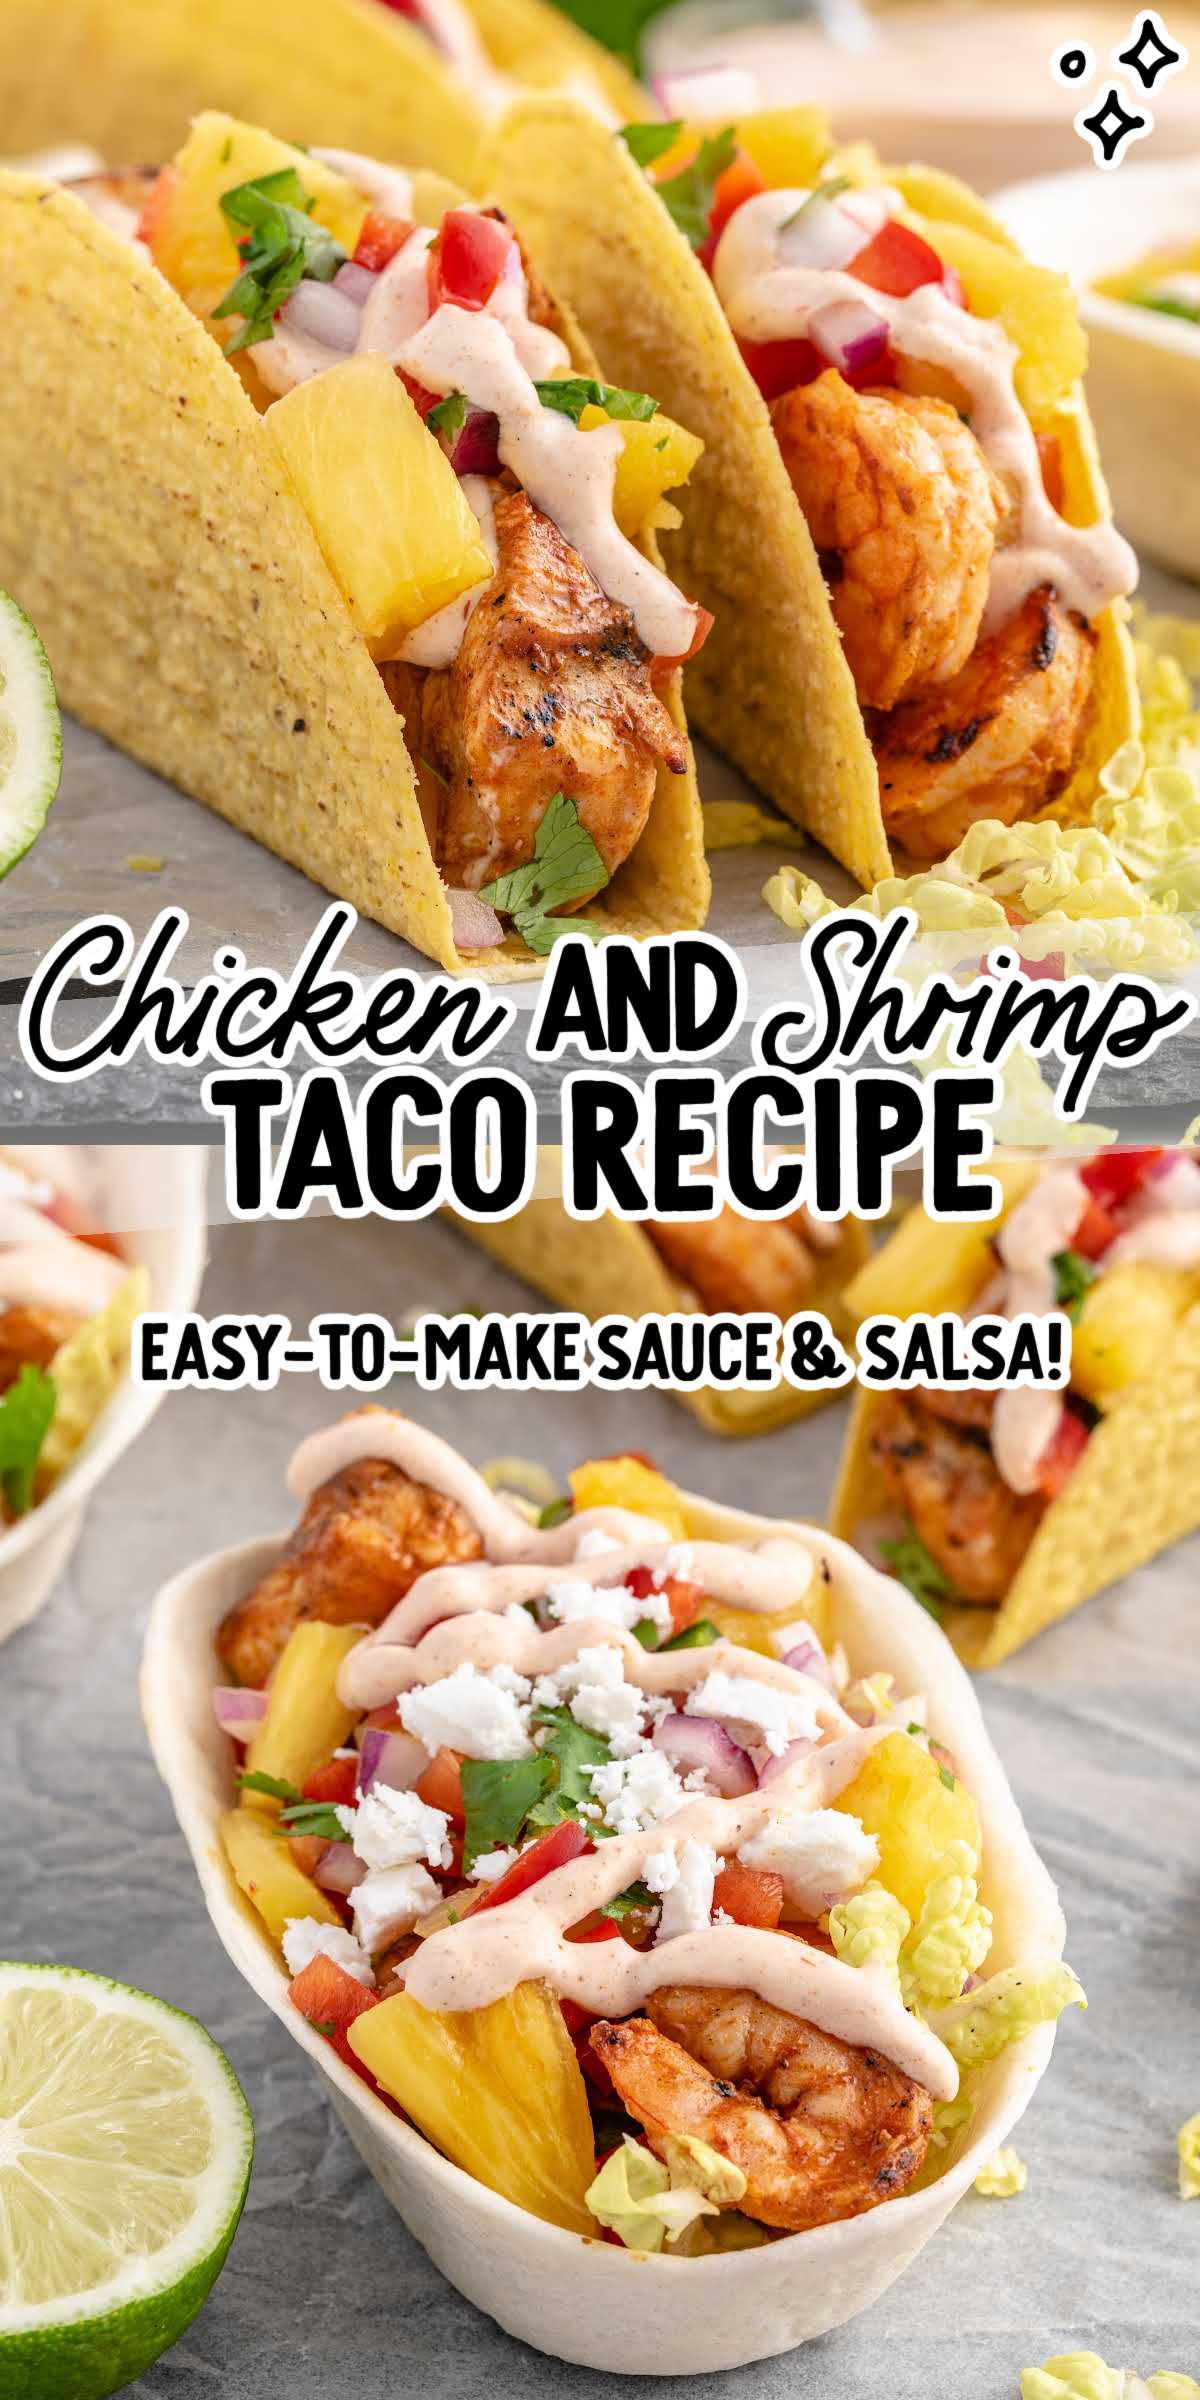 Chicken And Shrimp Tacos - Spaceships and Laser Beams